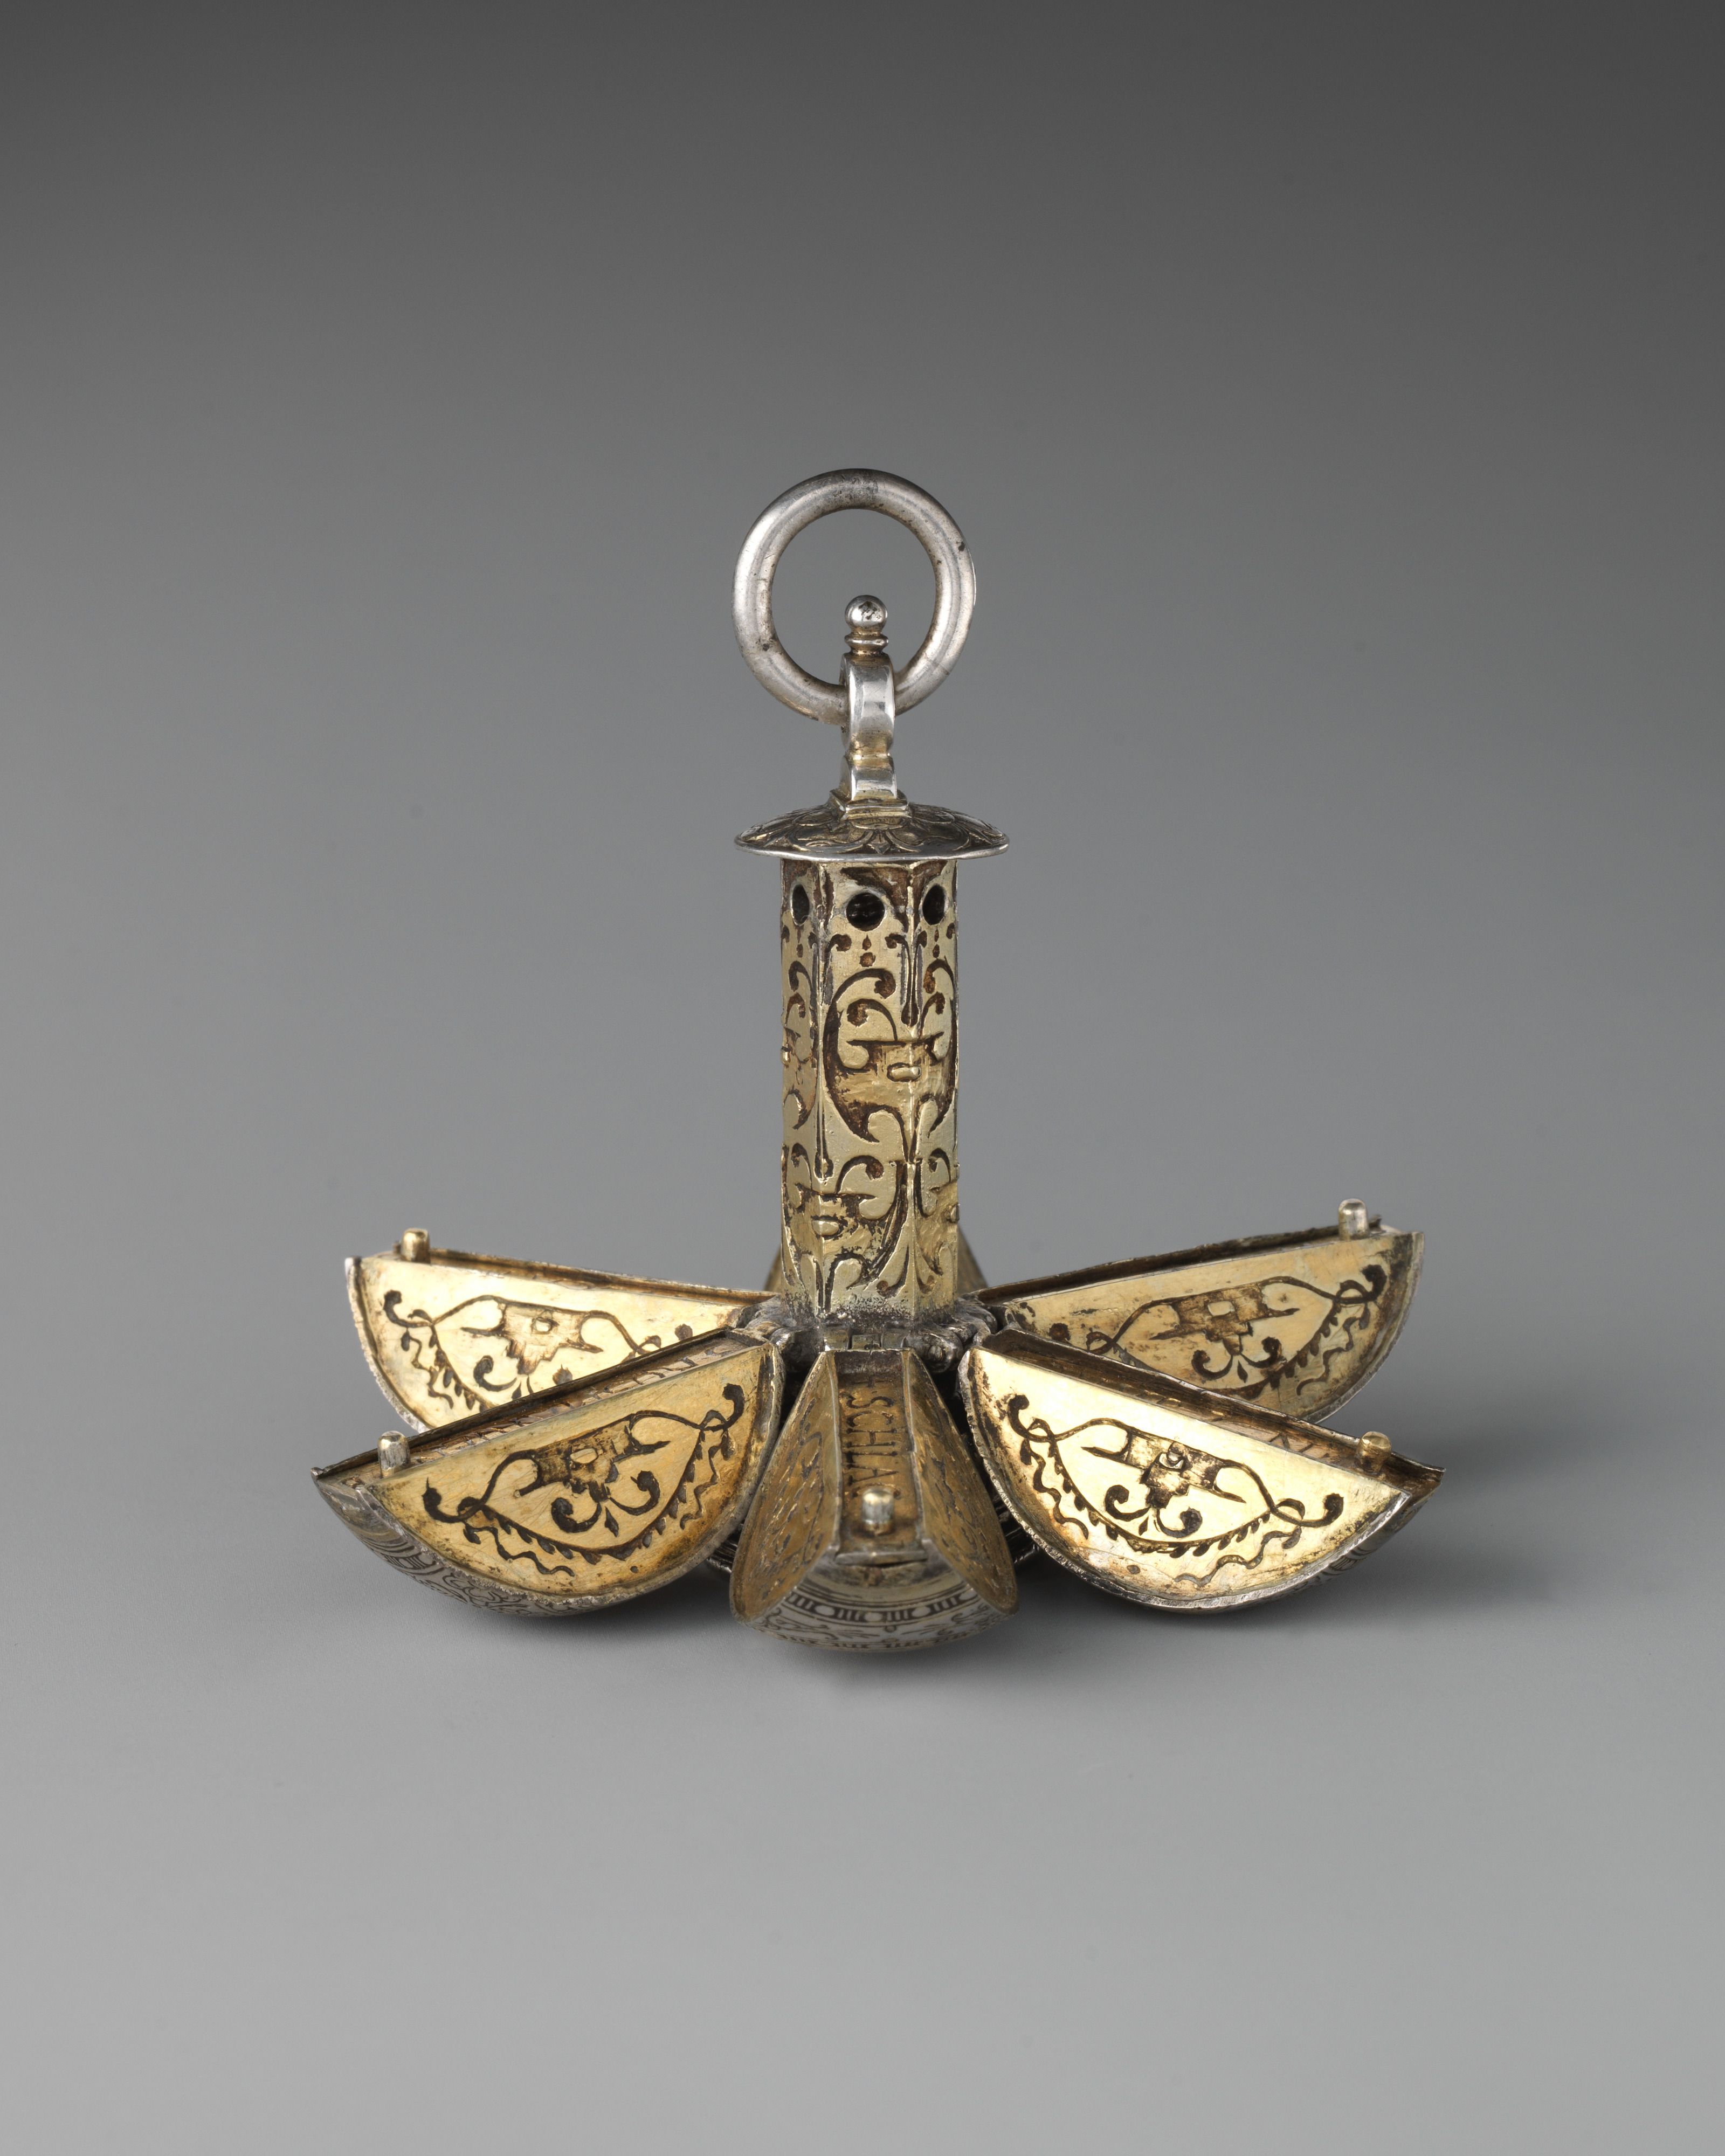 German pomander, 16th century, gilt silver. In the collection of the Metropolitan Museum of Art. 